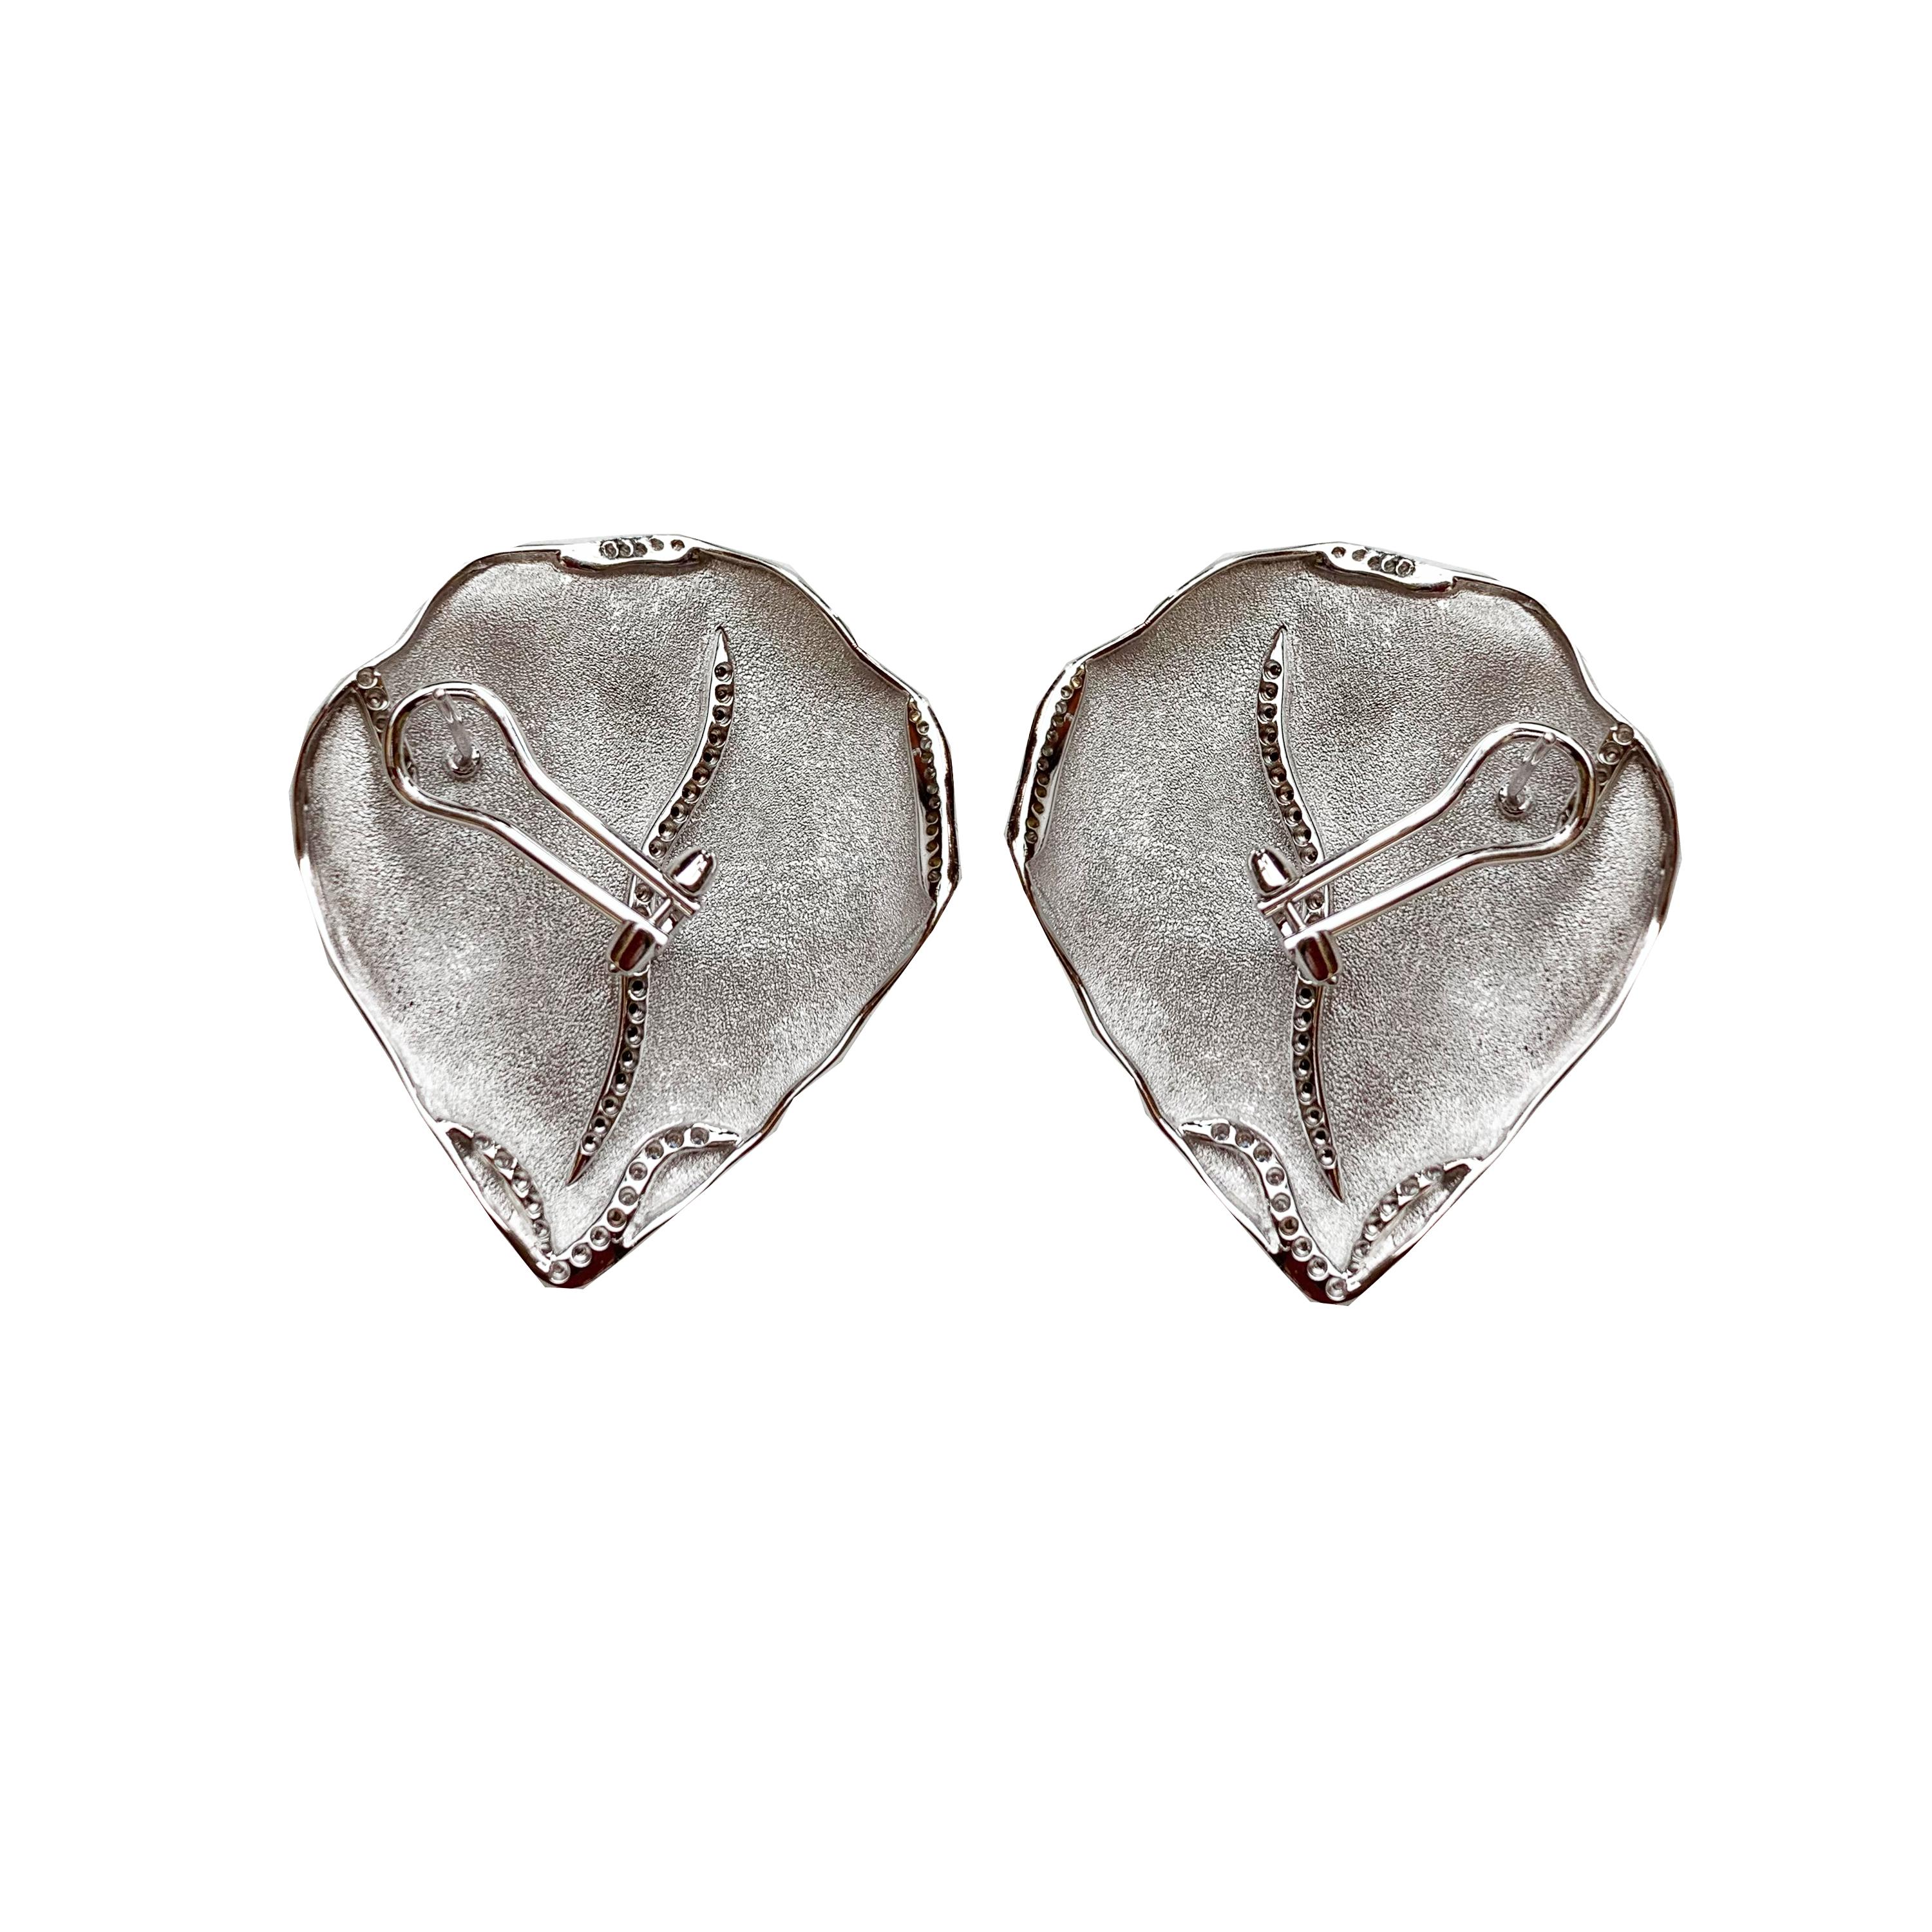 These sophisticated white god earrings have been chiseled  as a petal and the hand engraved giving the gold a shiny silk texture. Rows of white sparkling diamonds have been set to enhance the brightness of these pieces. Completely hand made in Italy